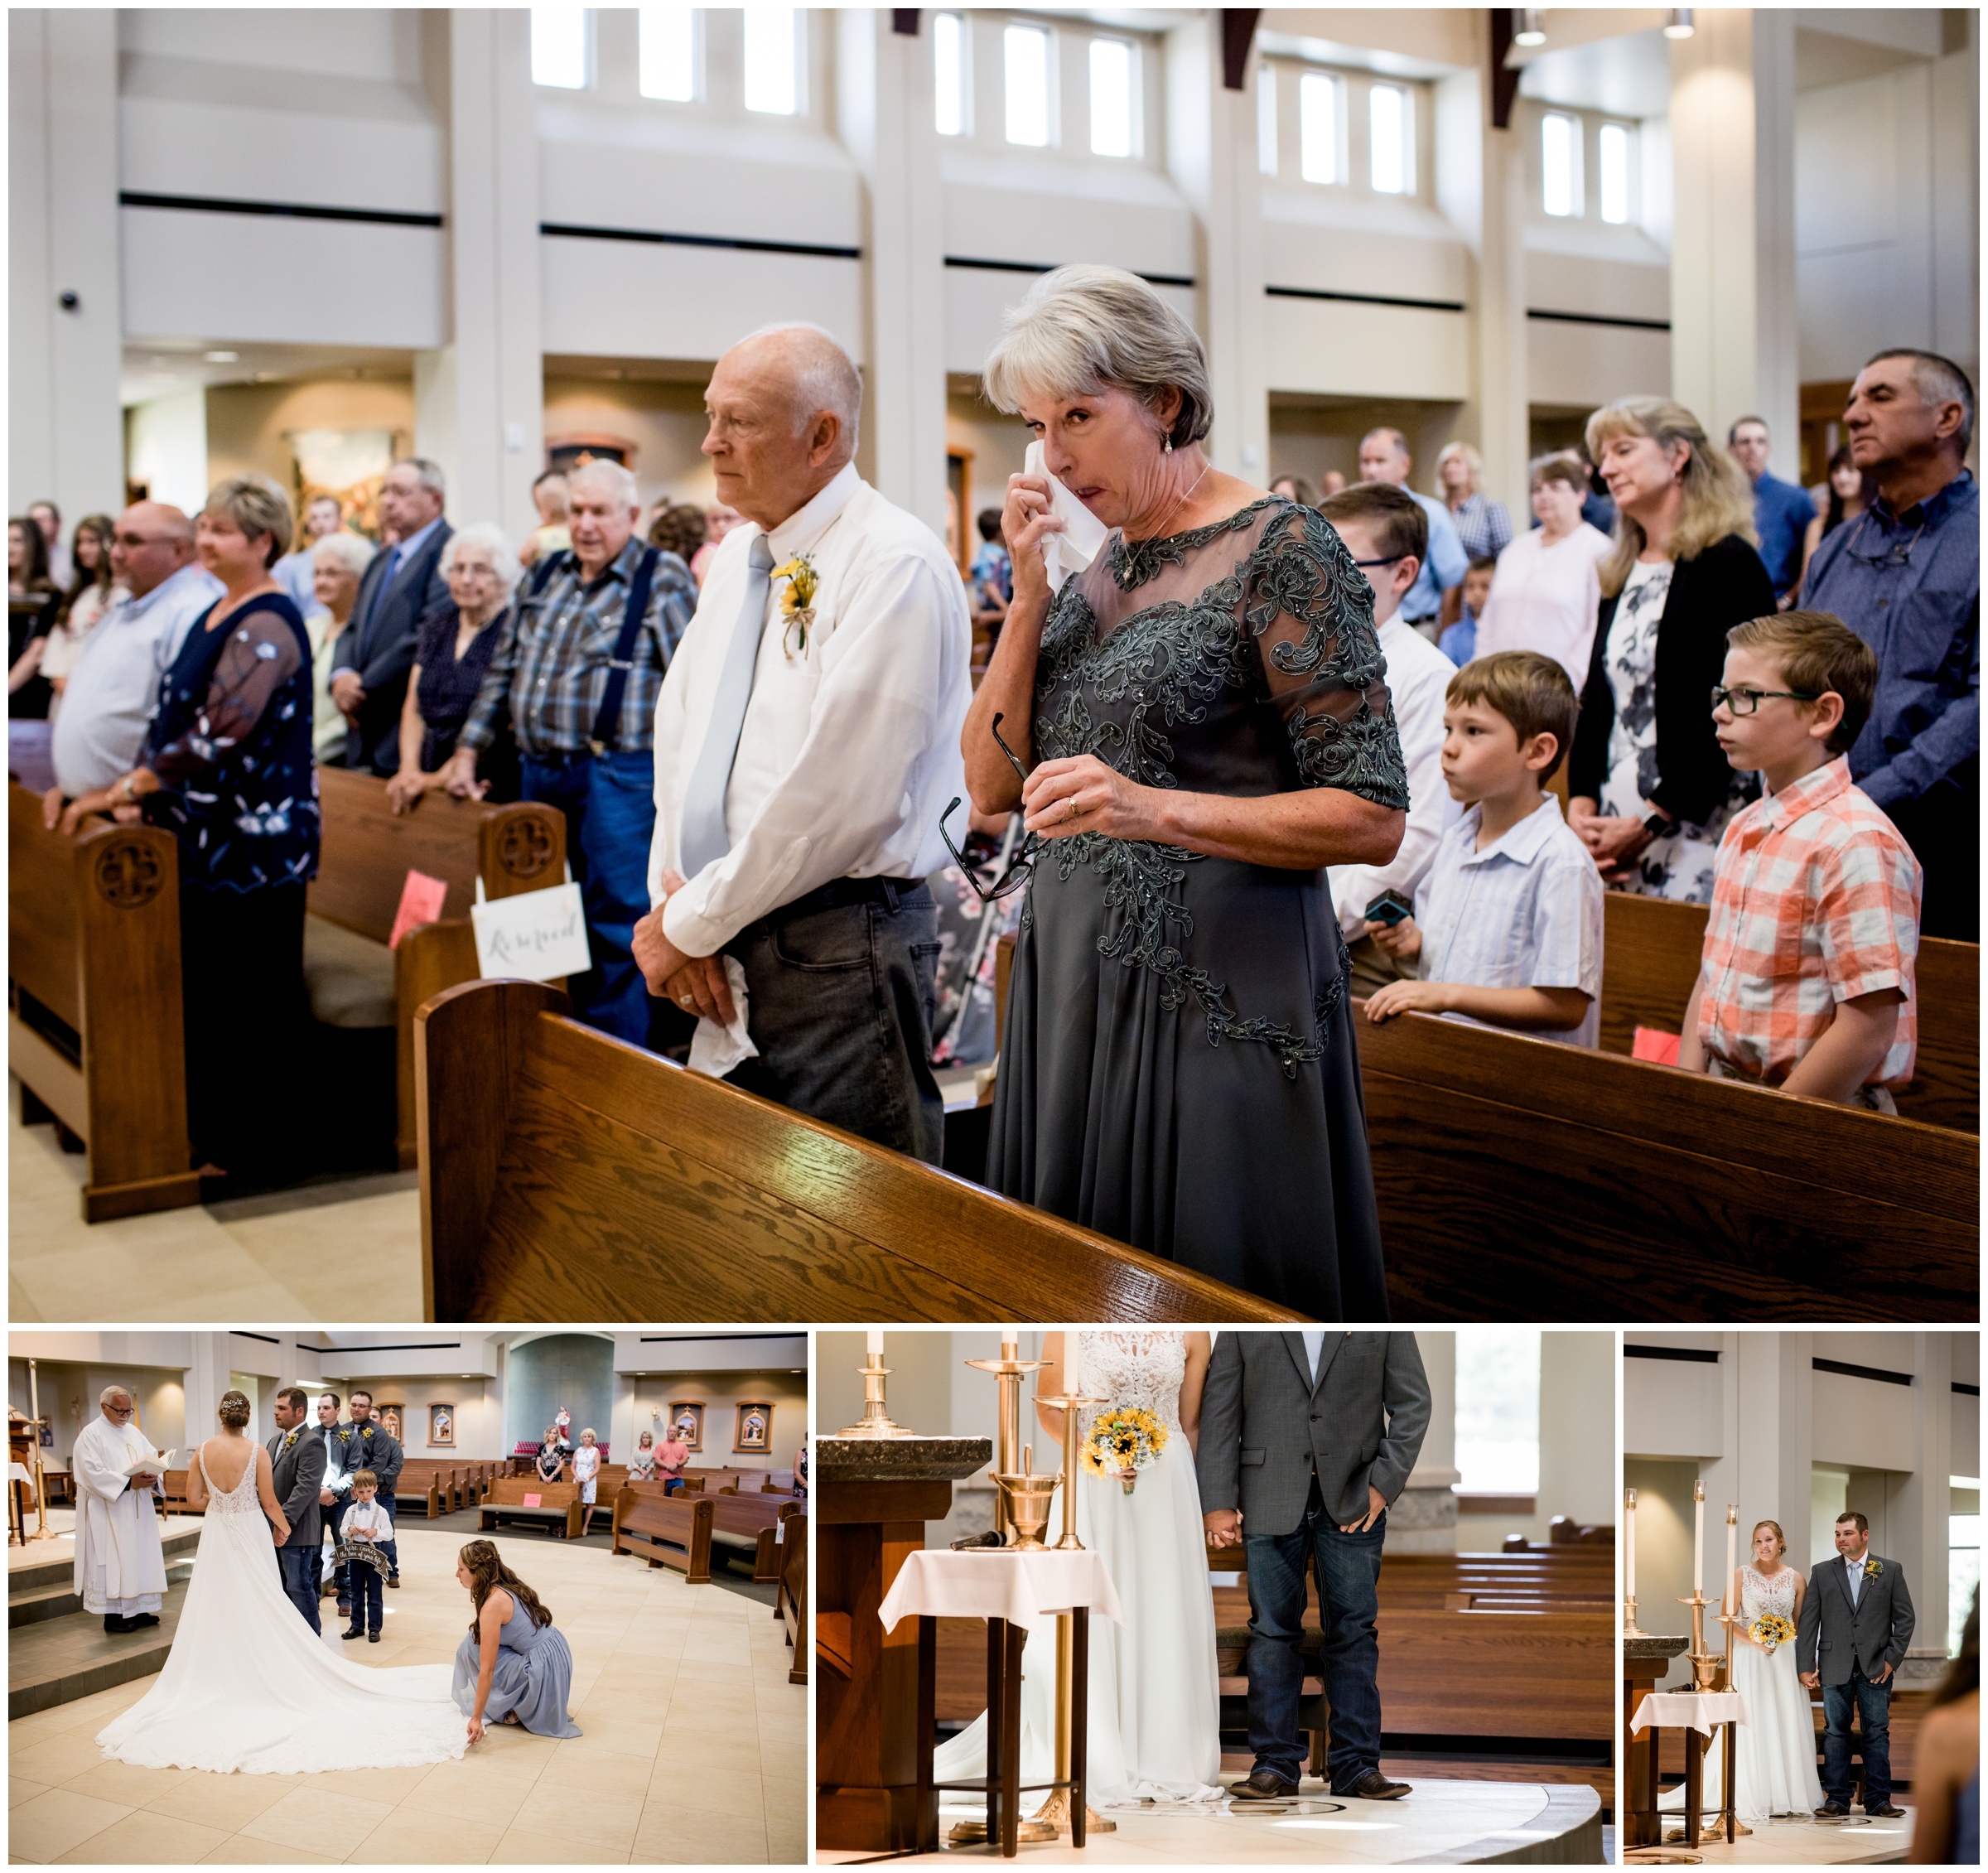 Our Lady of the Valley Windsor Colorado church wedding ceremony photos by Plum Pretty Photo 